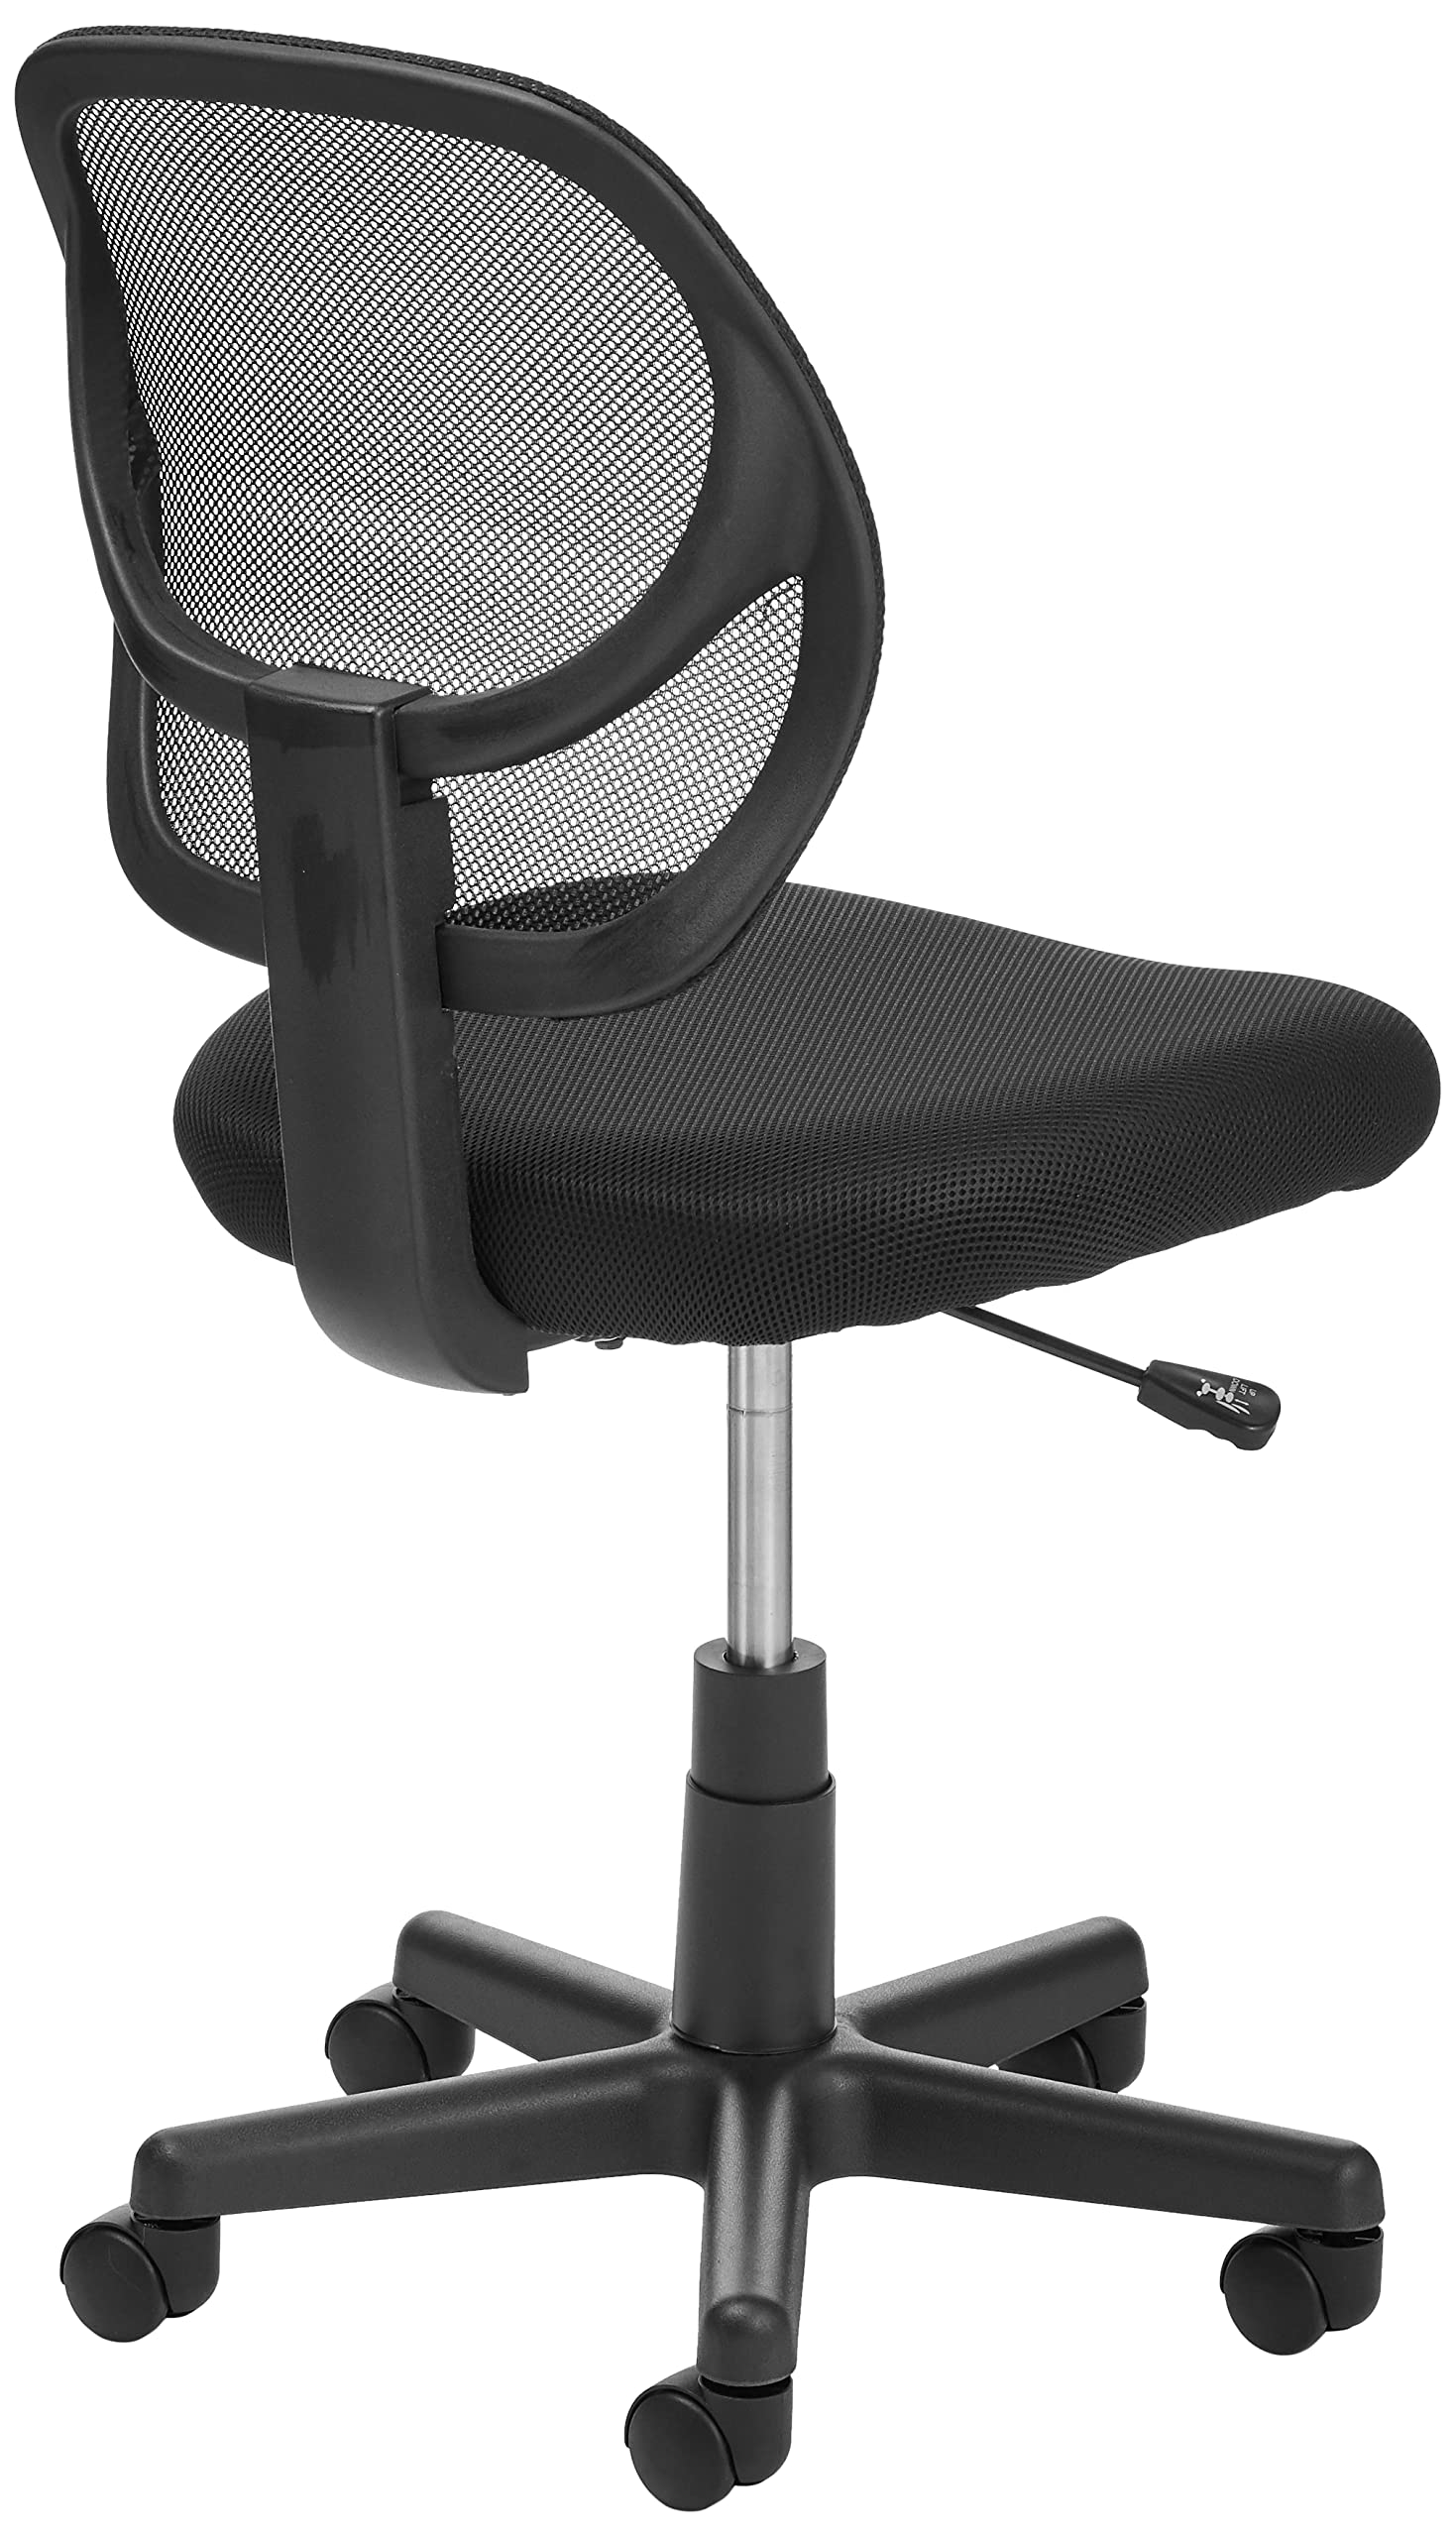   Basics Low-Back Computer Task Office Desk Chair with  Swivel Casters, 18.7D x 17.7W x 38.2H, Blue : Office Products